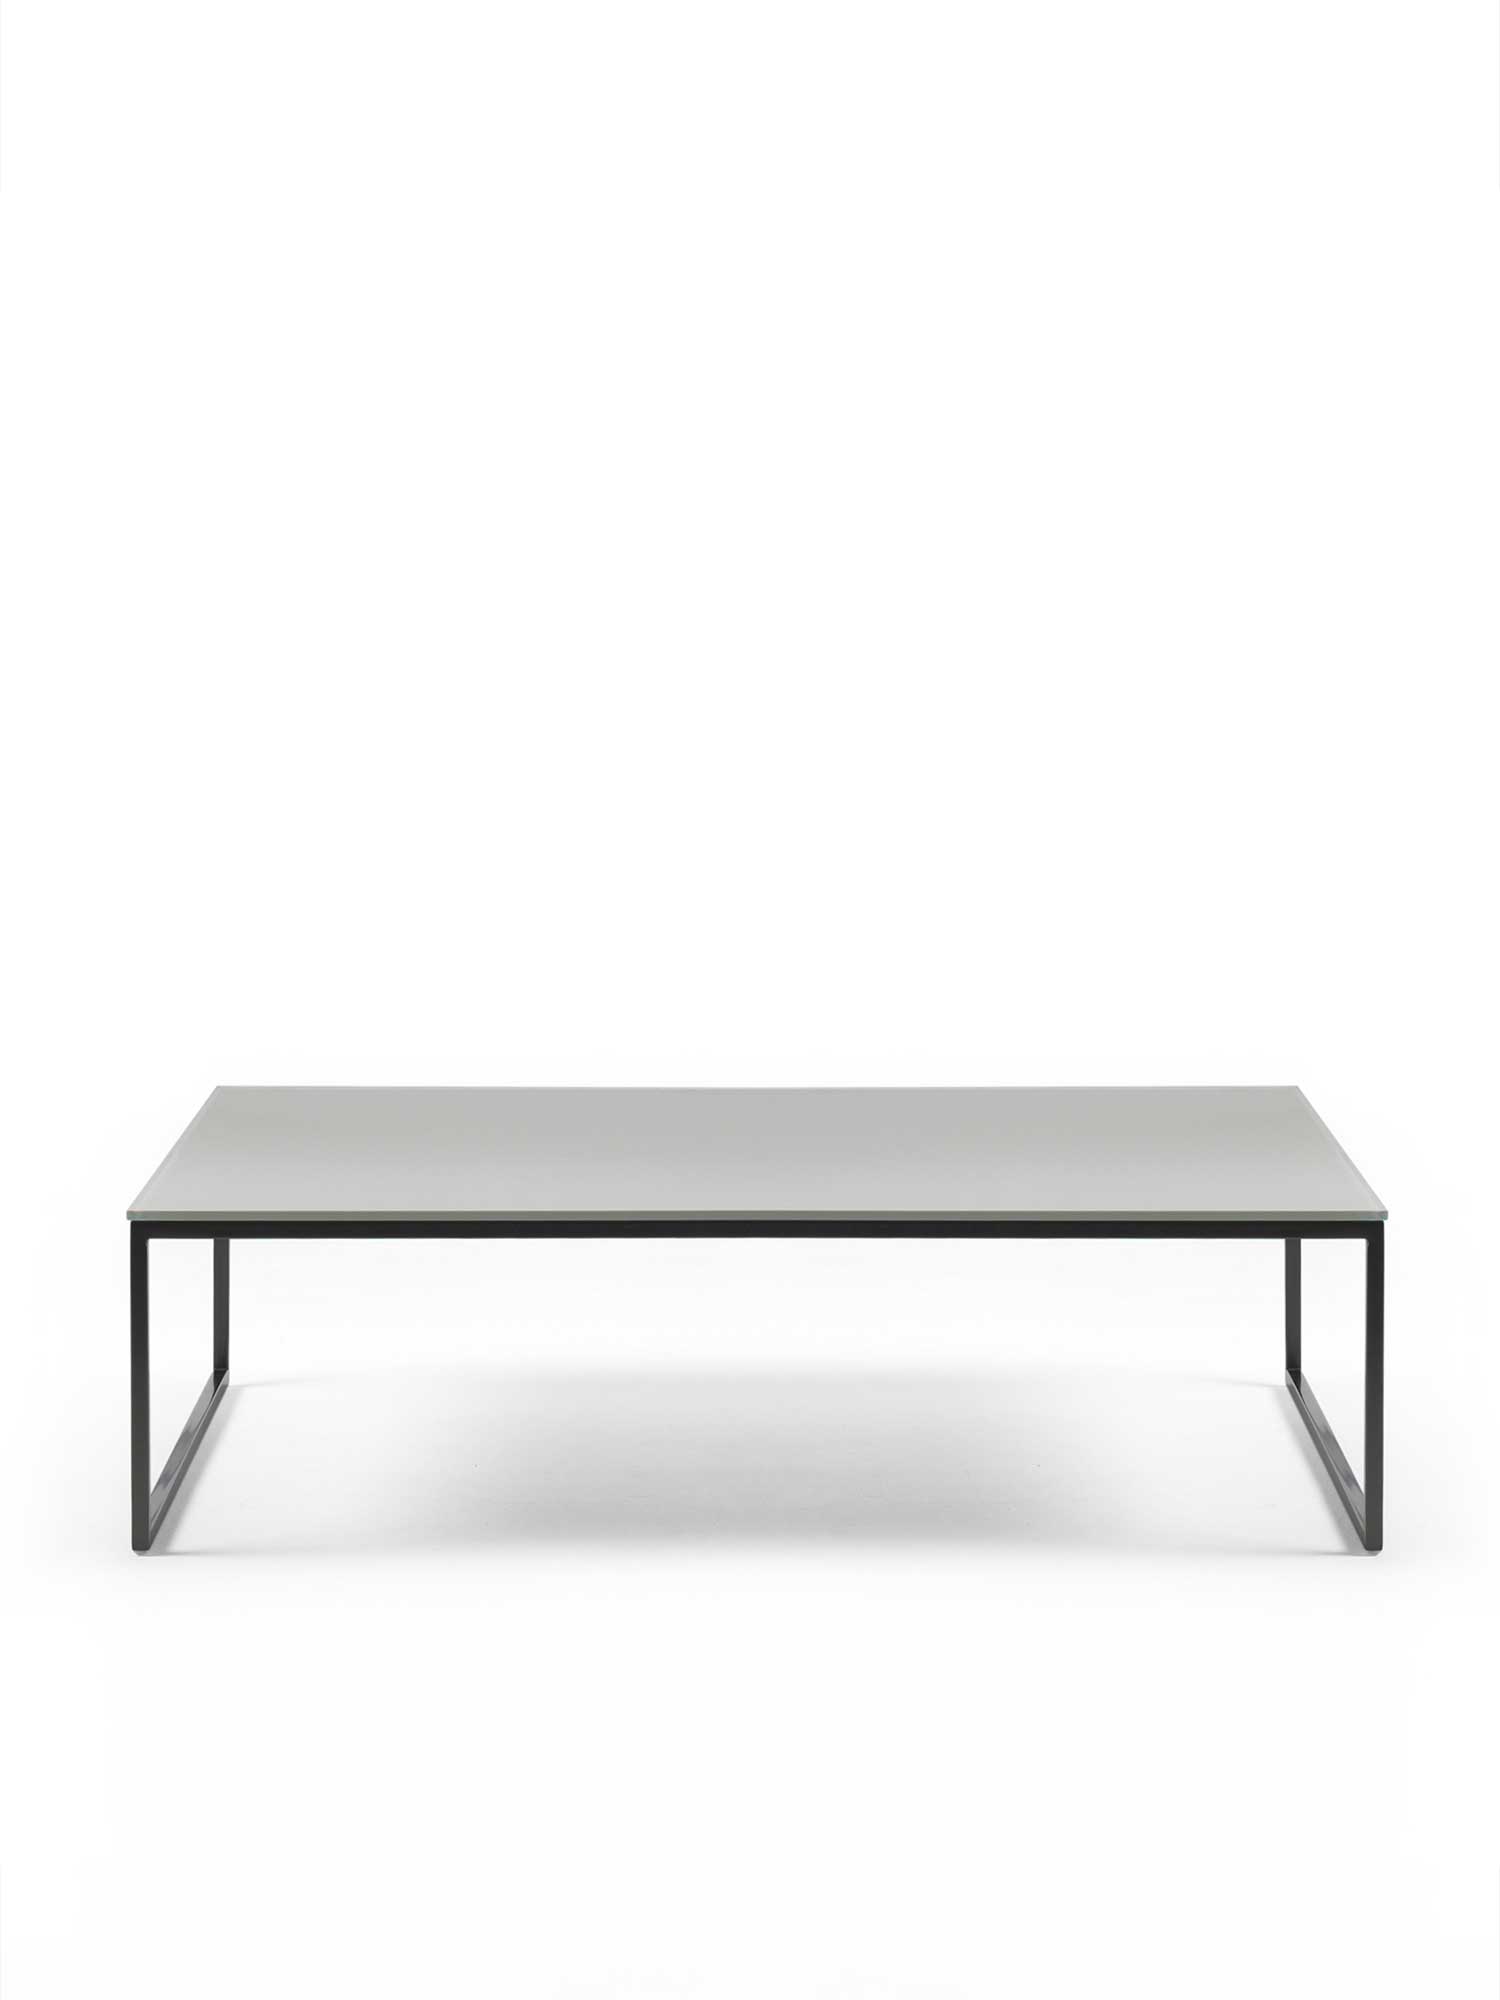 Img004 Frame Coffee Table 120x70x40h OPM6 OPV5